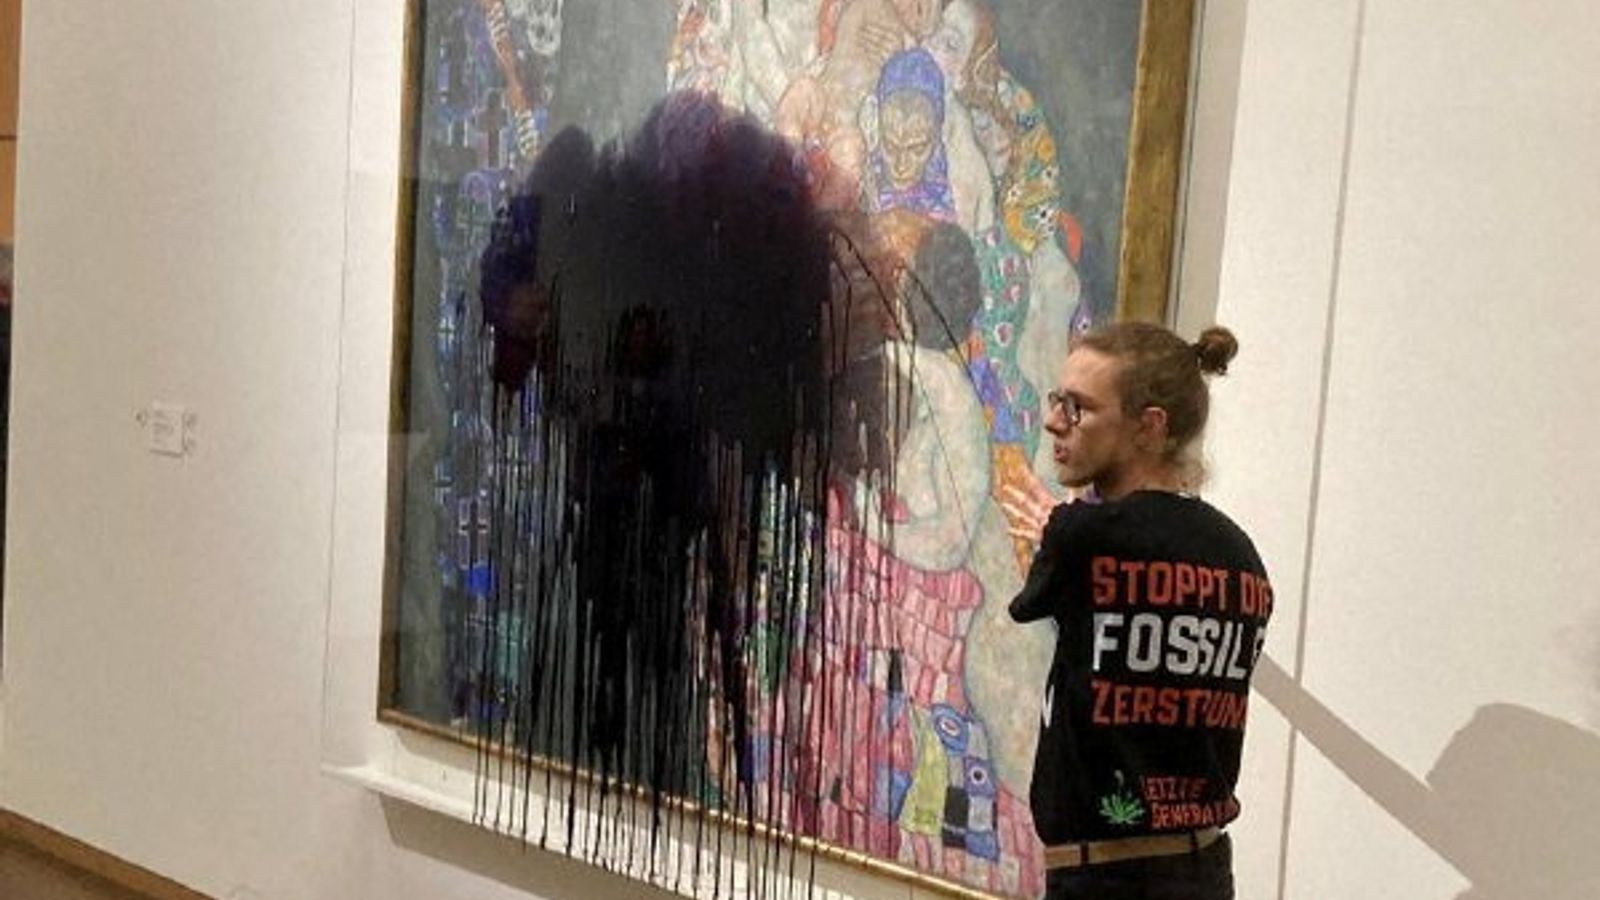 Climate activist attacks Gustav Klimt painting while another glues himself to the frame